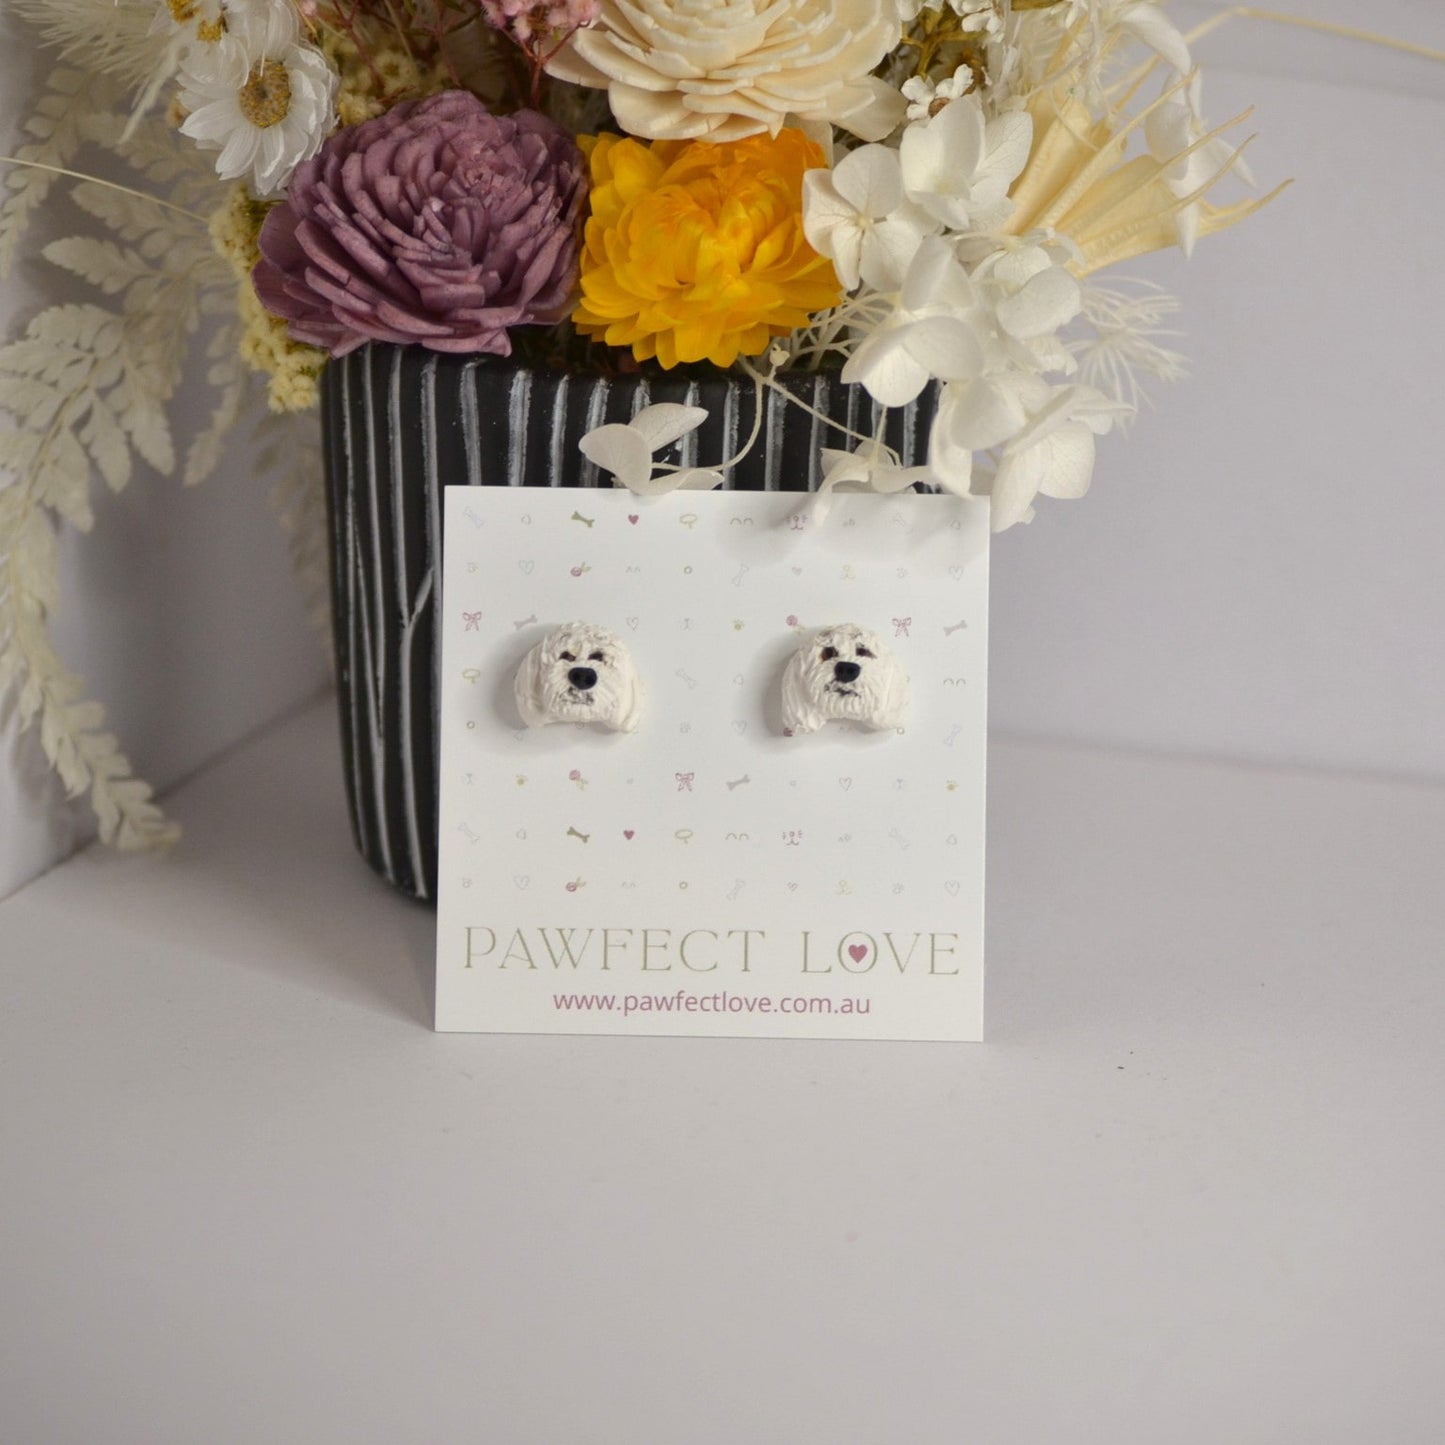 Handmade white poodle stud earrings by Pawfect Love, positioned in front of dried flower arrangement